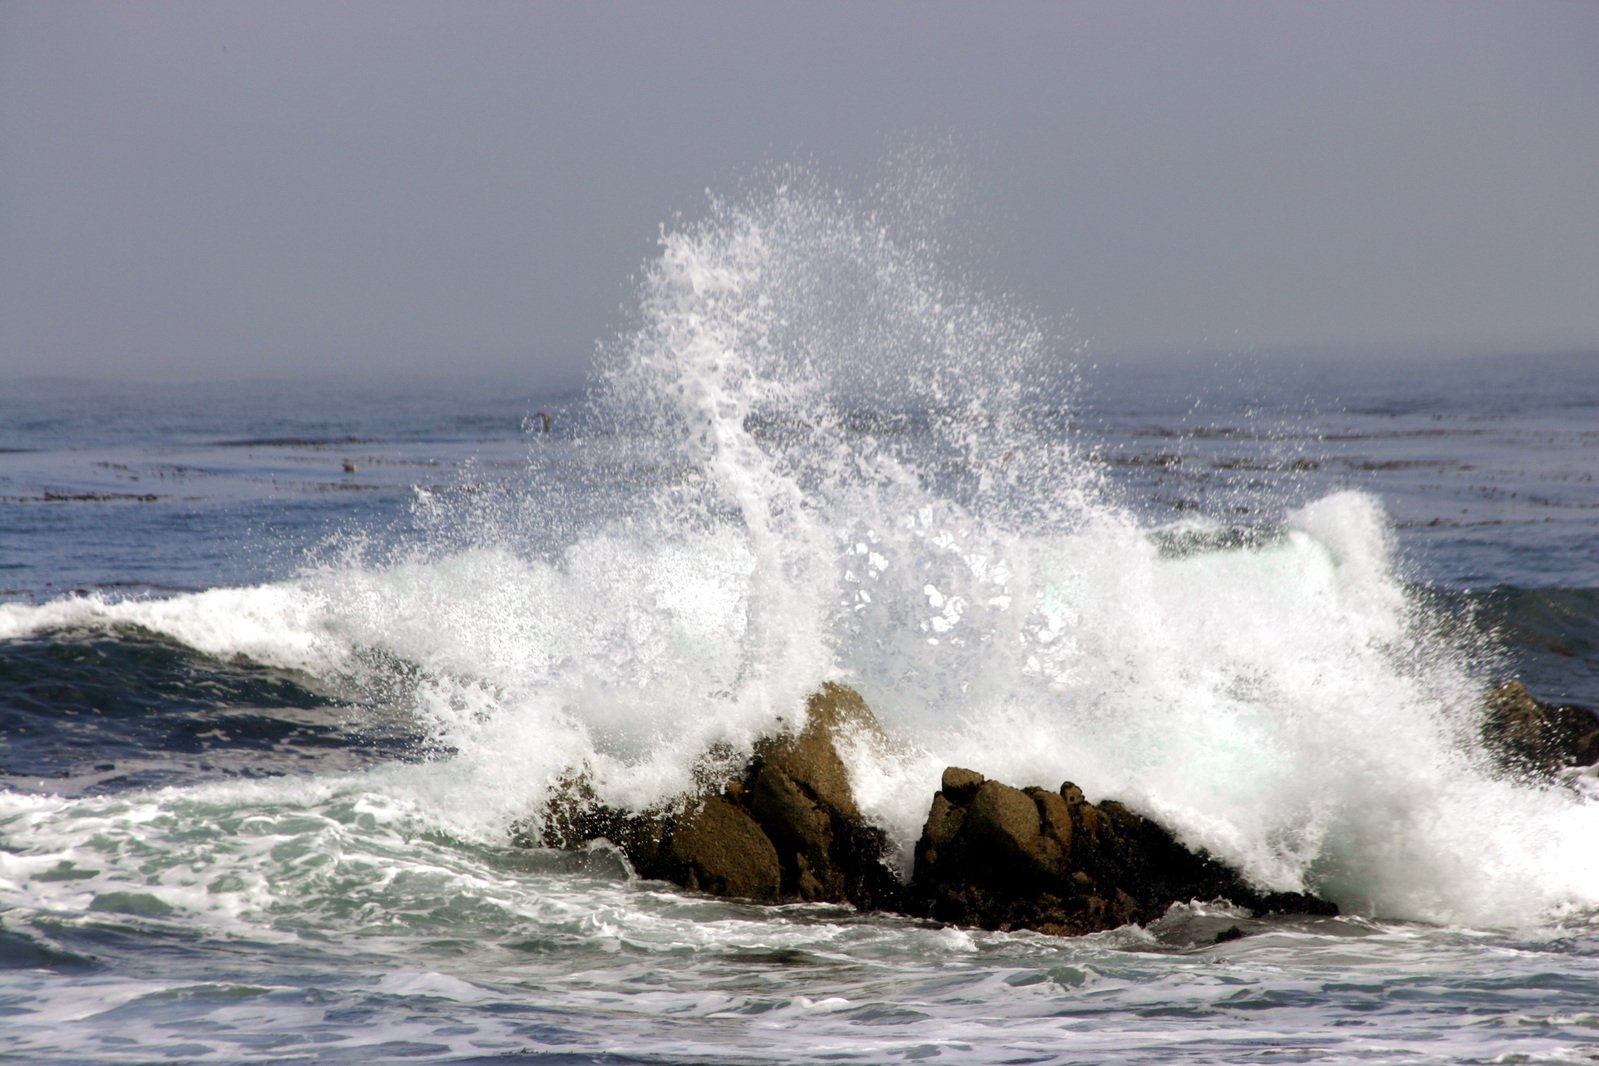 the waves are coming towards the rocky shore